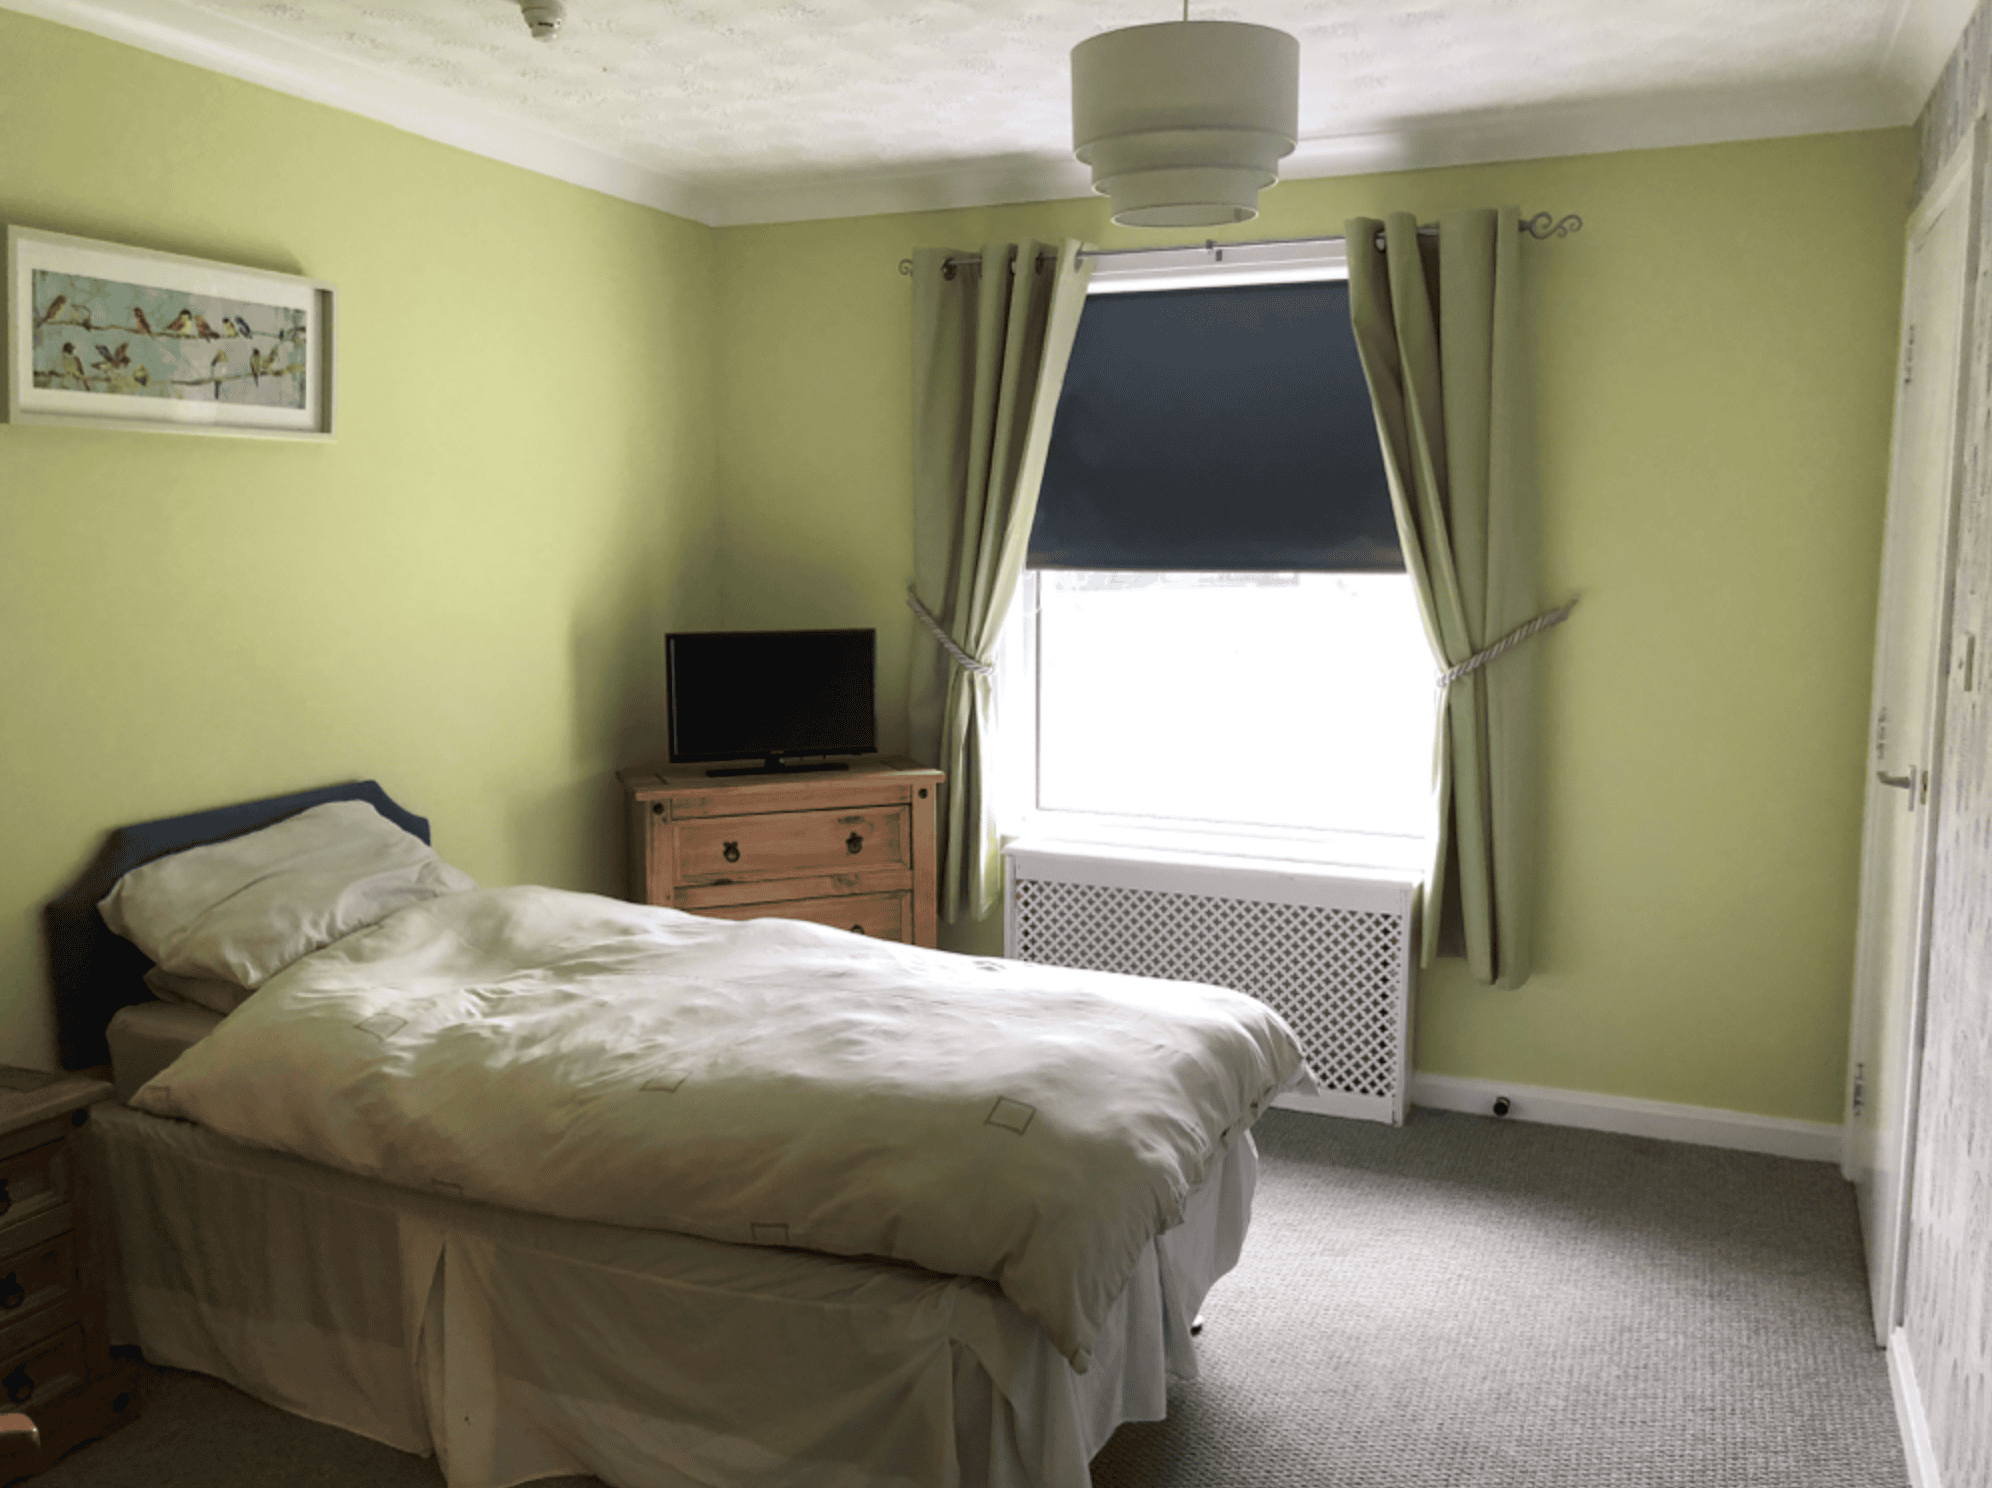 Bedroom of Glebe House Care Home in Ayr, South Ayrshire